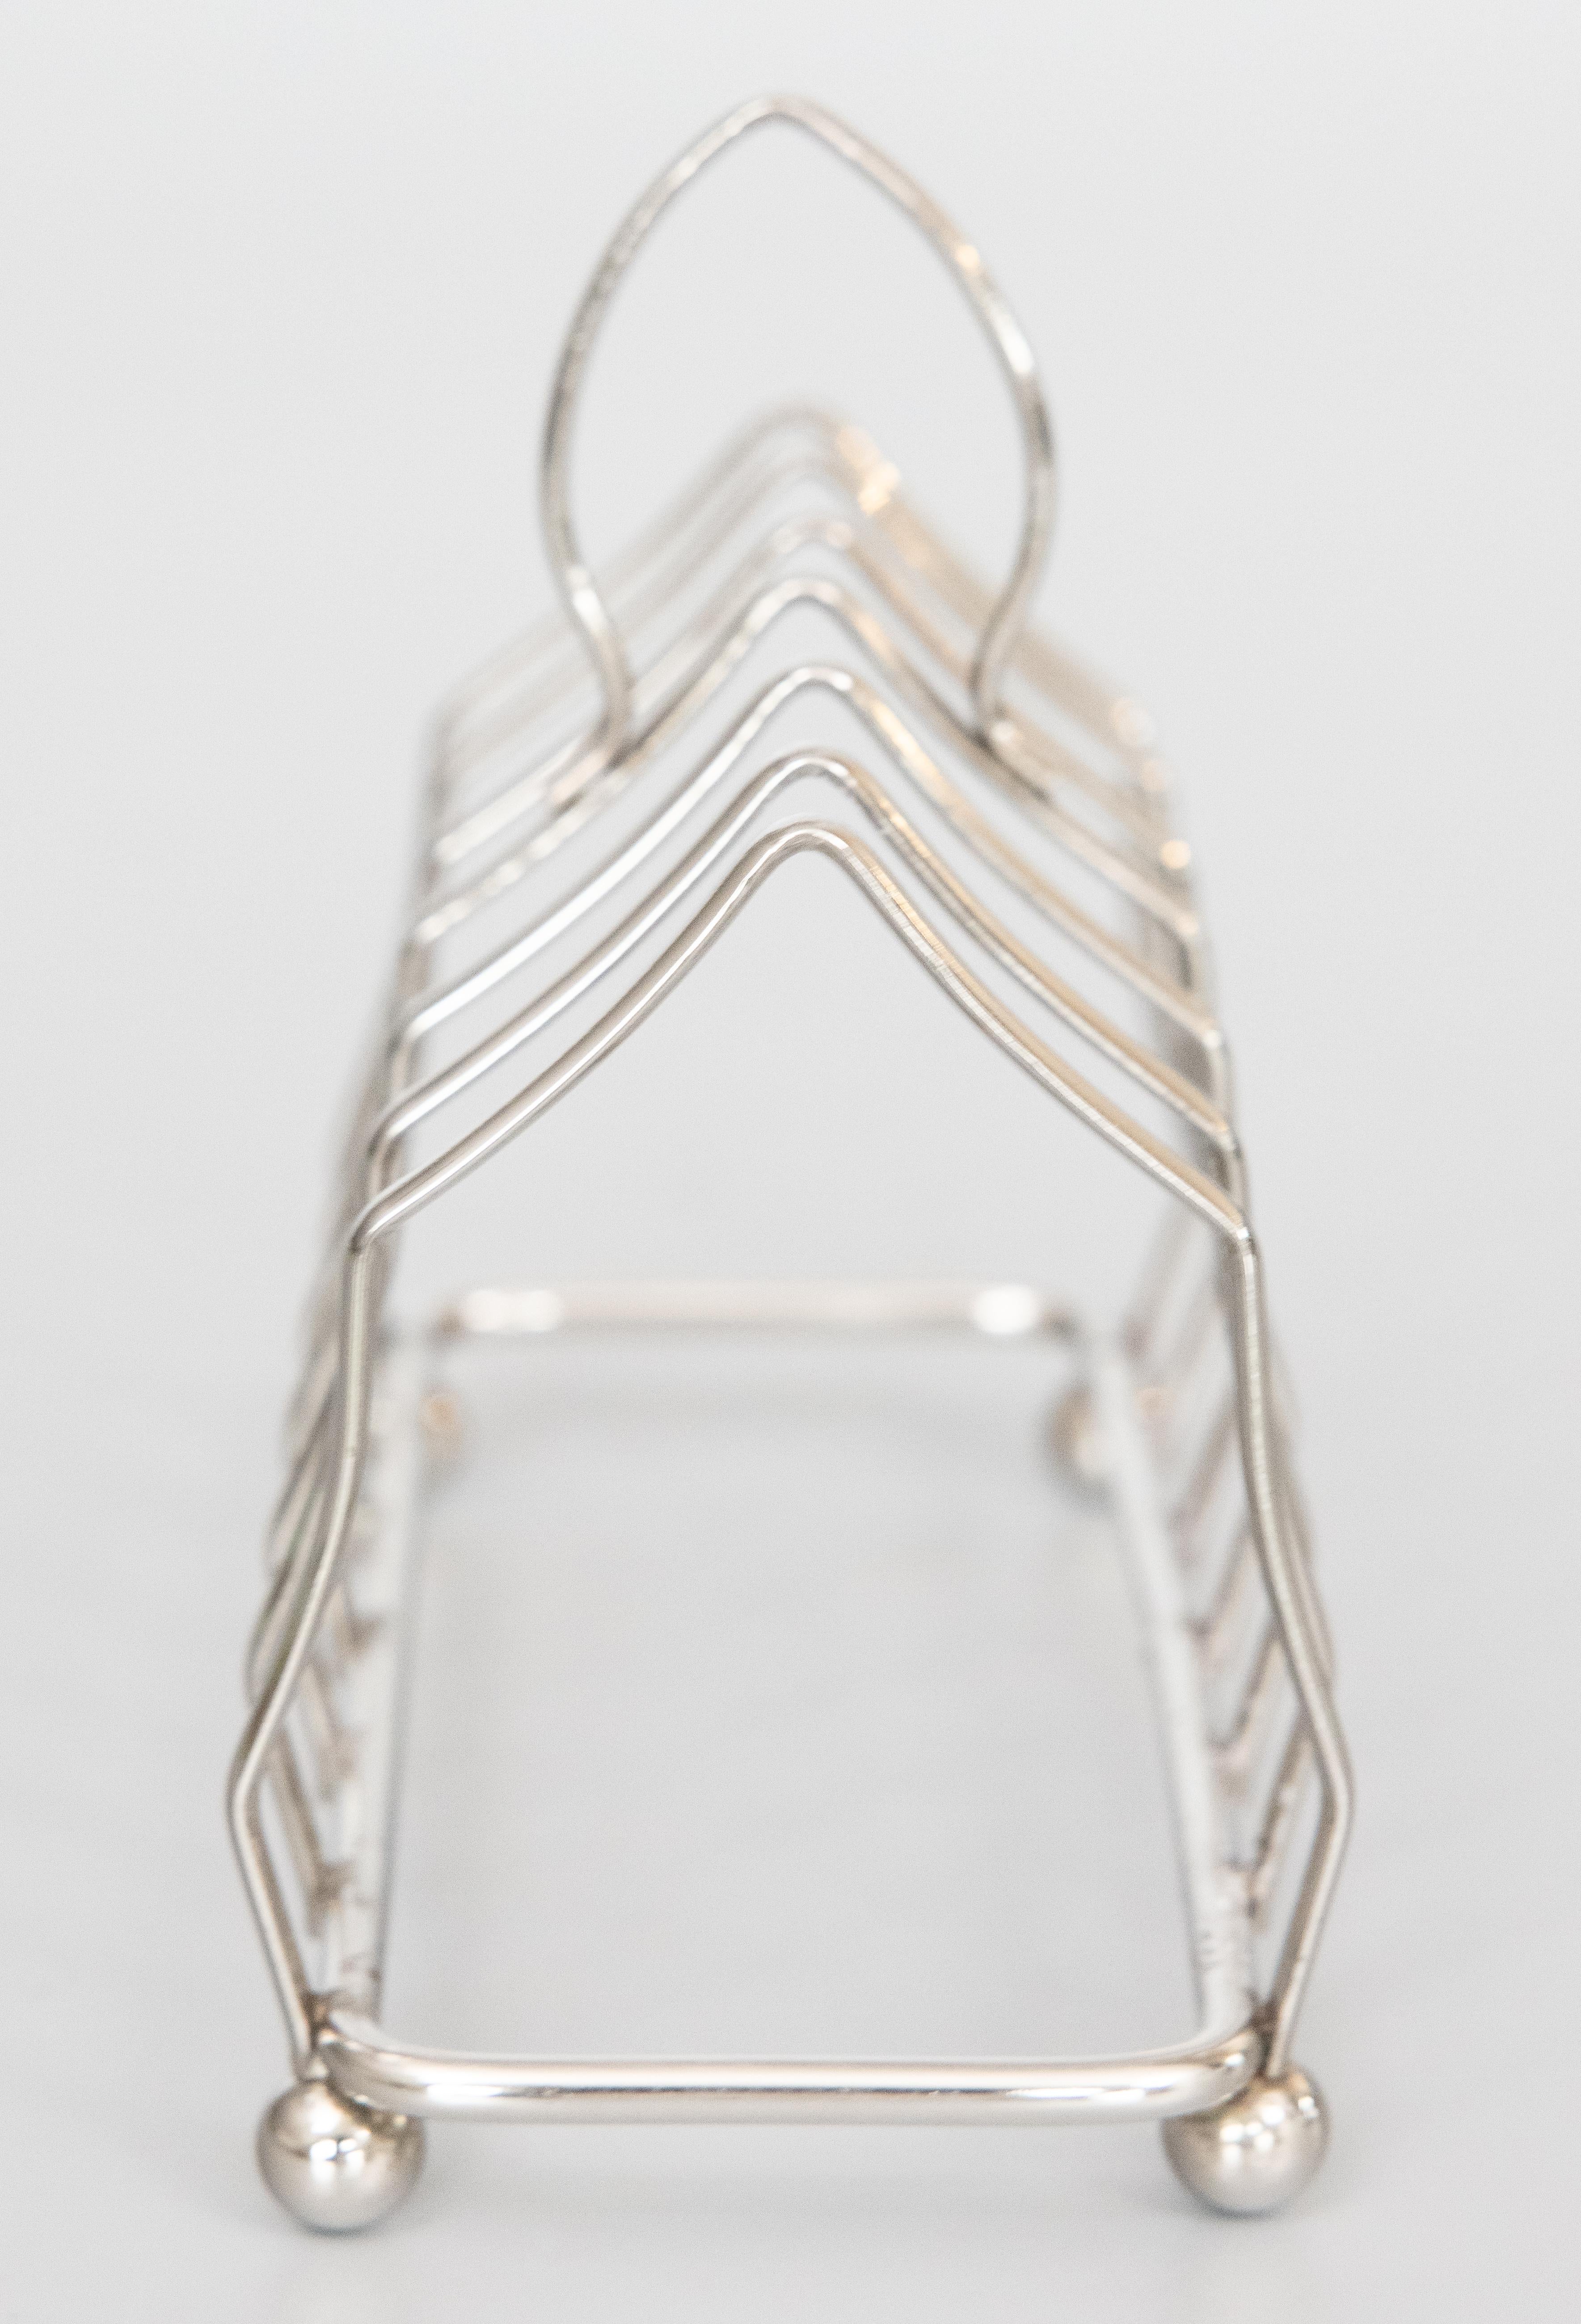 20th Century Art Deco Style English Silver Plate Toast Rack Letter Holder, circa 1950 For Sale